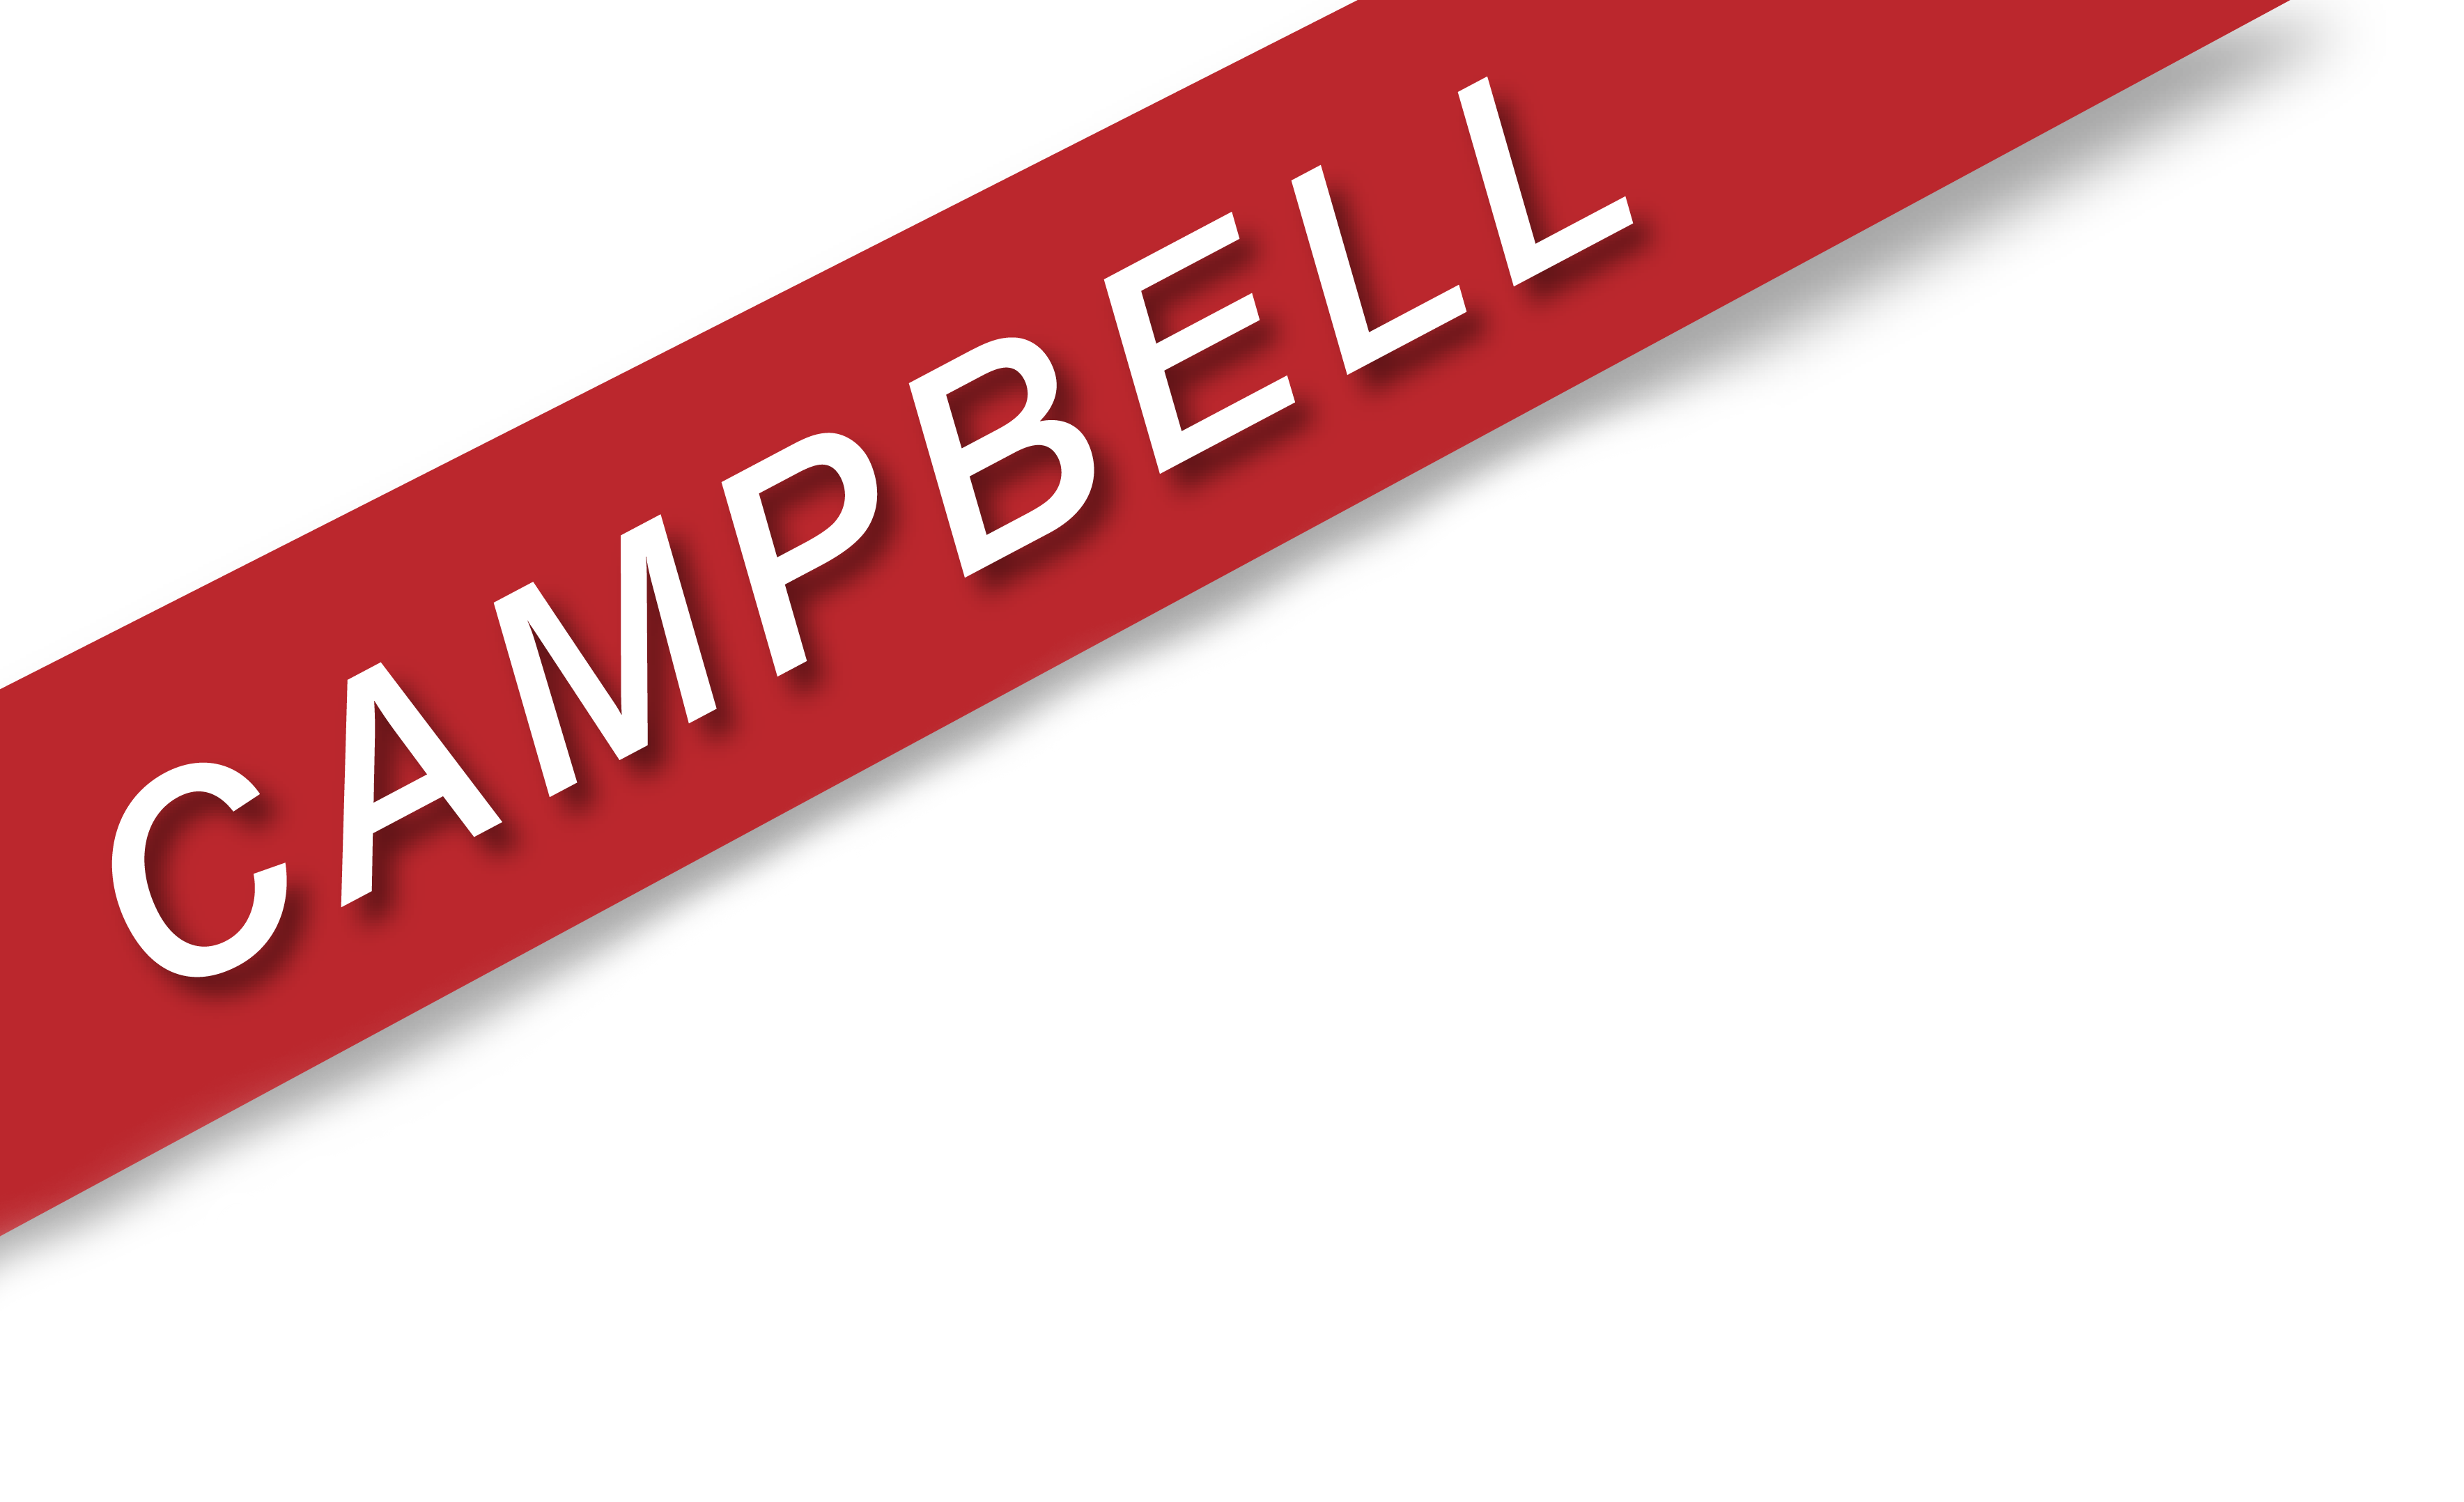 Campbell Commercial Real Estate Inc.